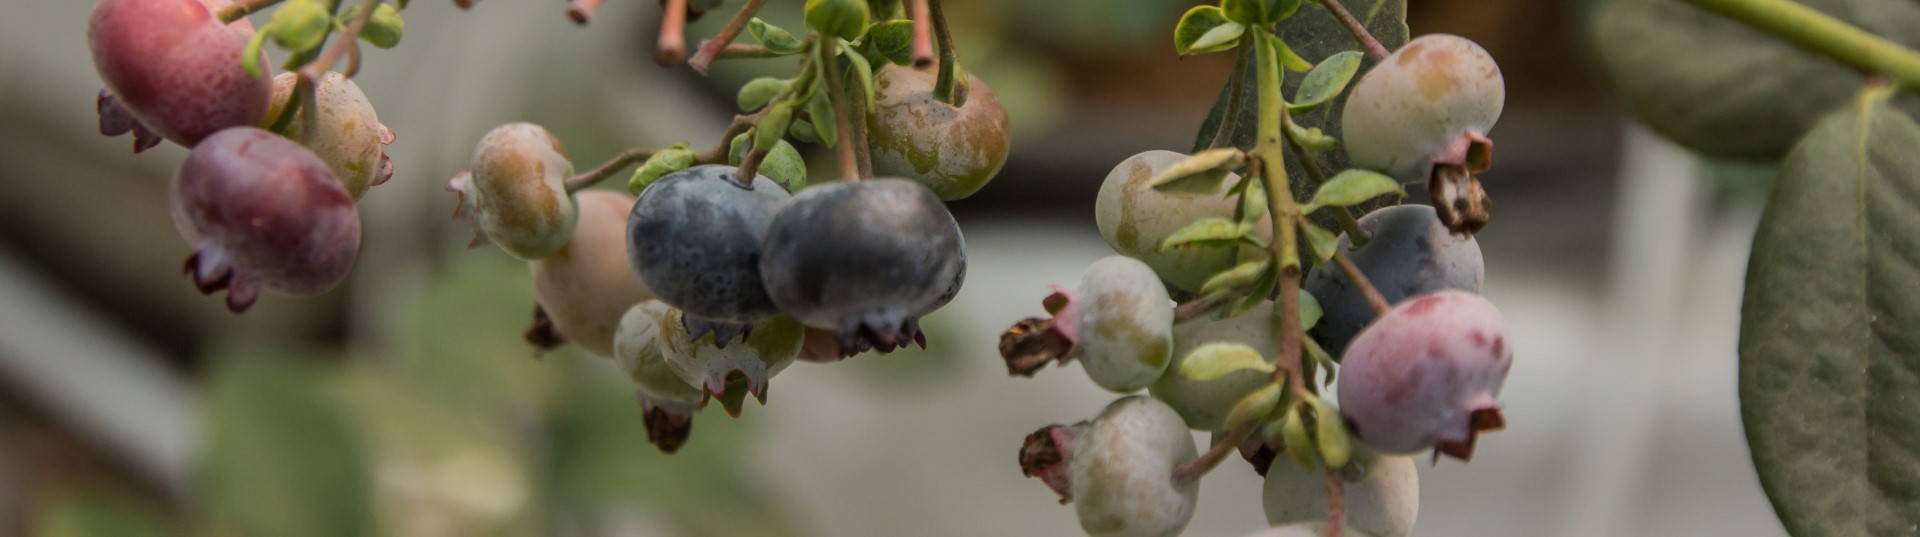 Soilless Commercial Blueberry Farming: Techniques and Innovations